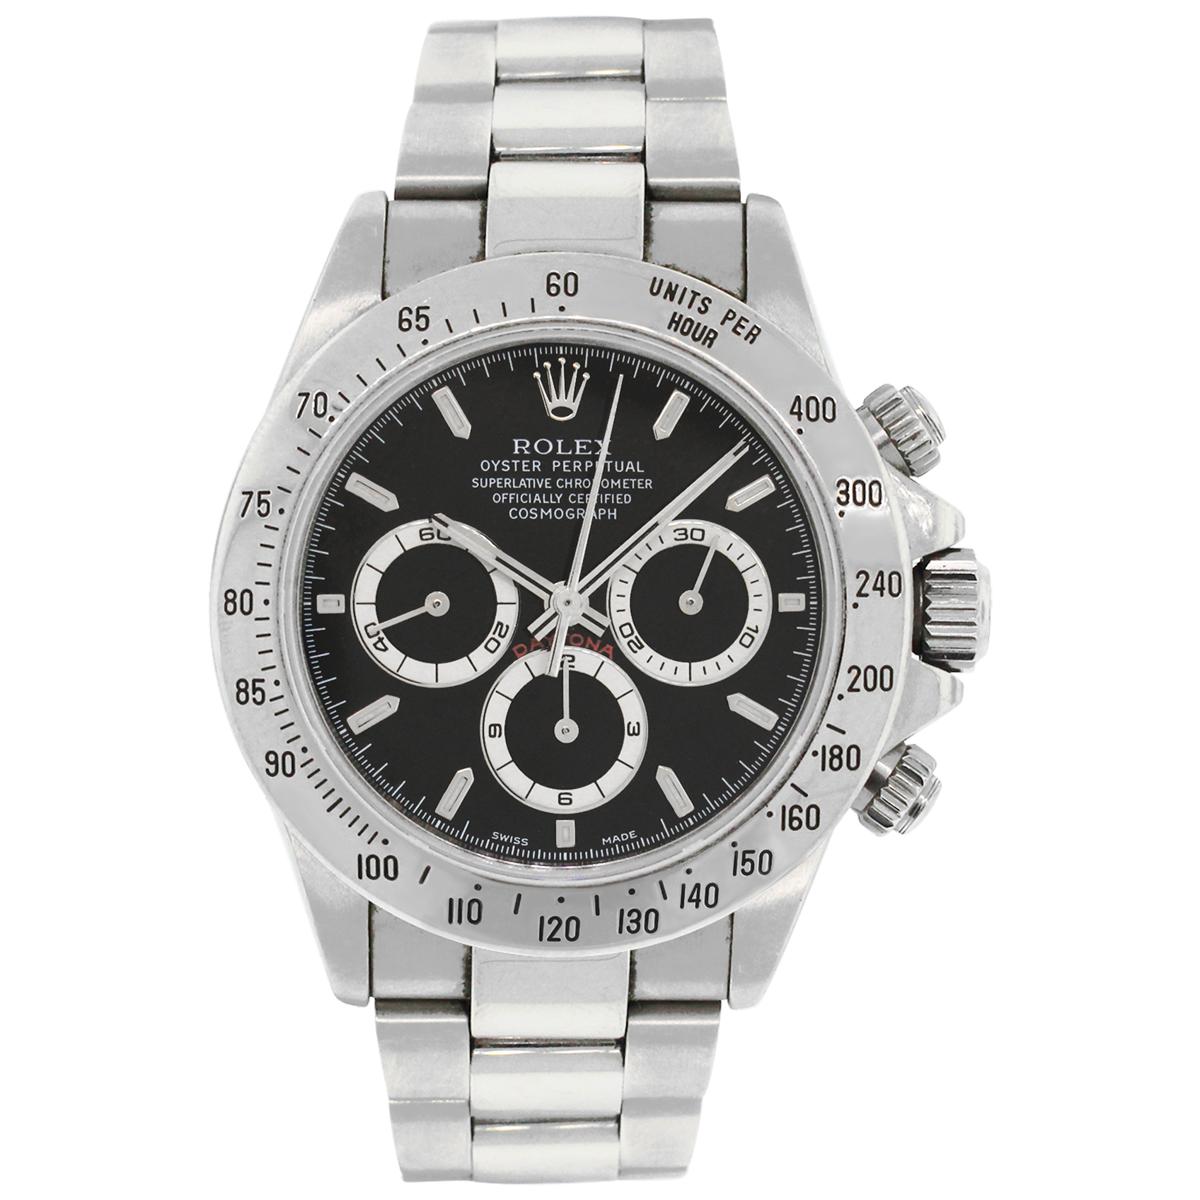 Brand: Rolex
MPN: 16520
Model: Zenith Daytona
Case Material: Stainless Steel
Case Diameter: 40mm
Crystal: Scratch resistant sapphire
Bezel: Stainless steel
Dial: Black chronograph dial with silver hour markers and hands
Bracelet: Stainless steel